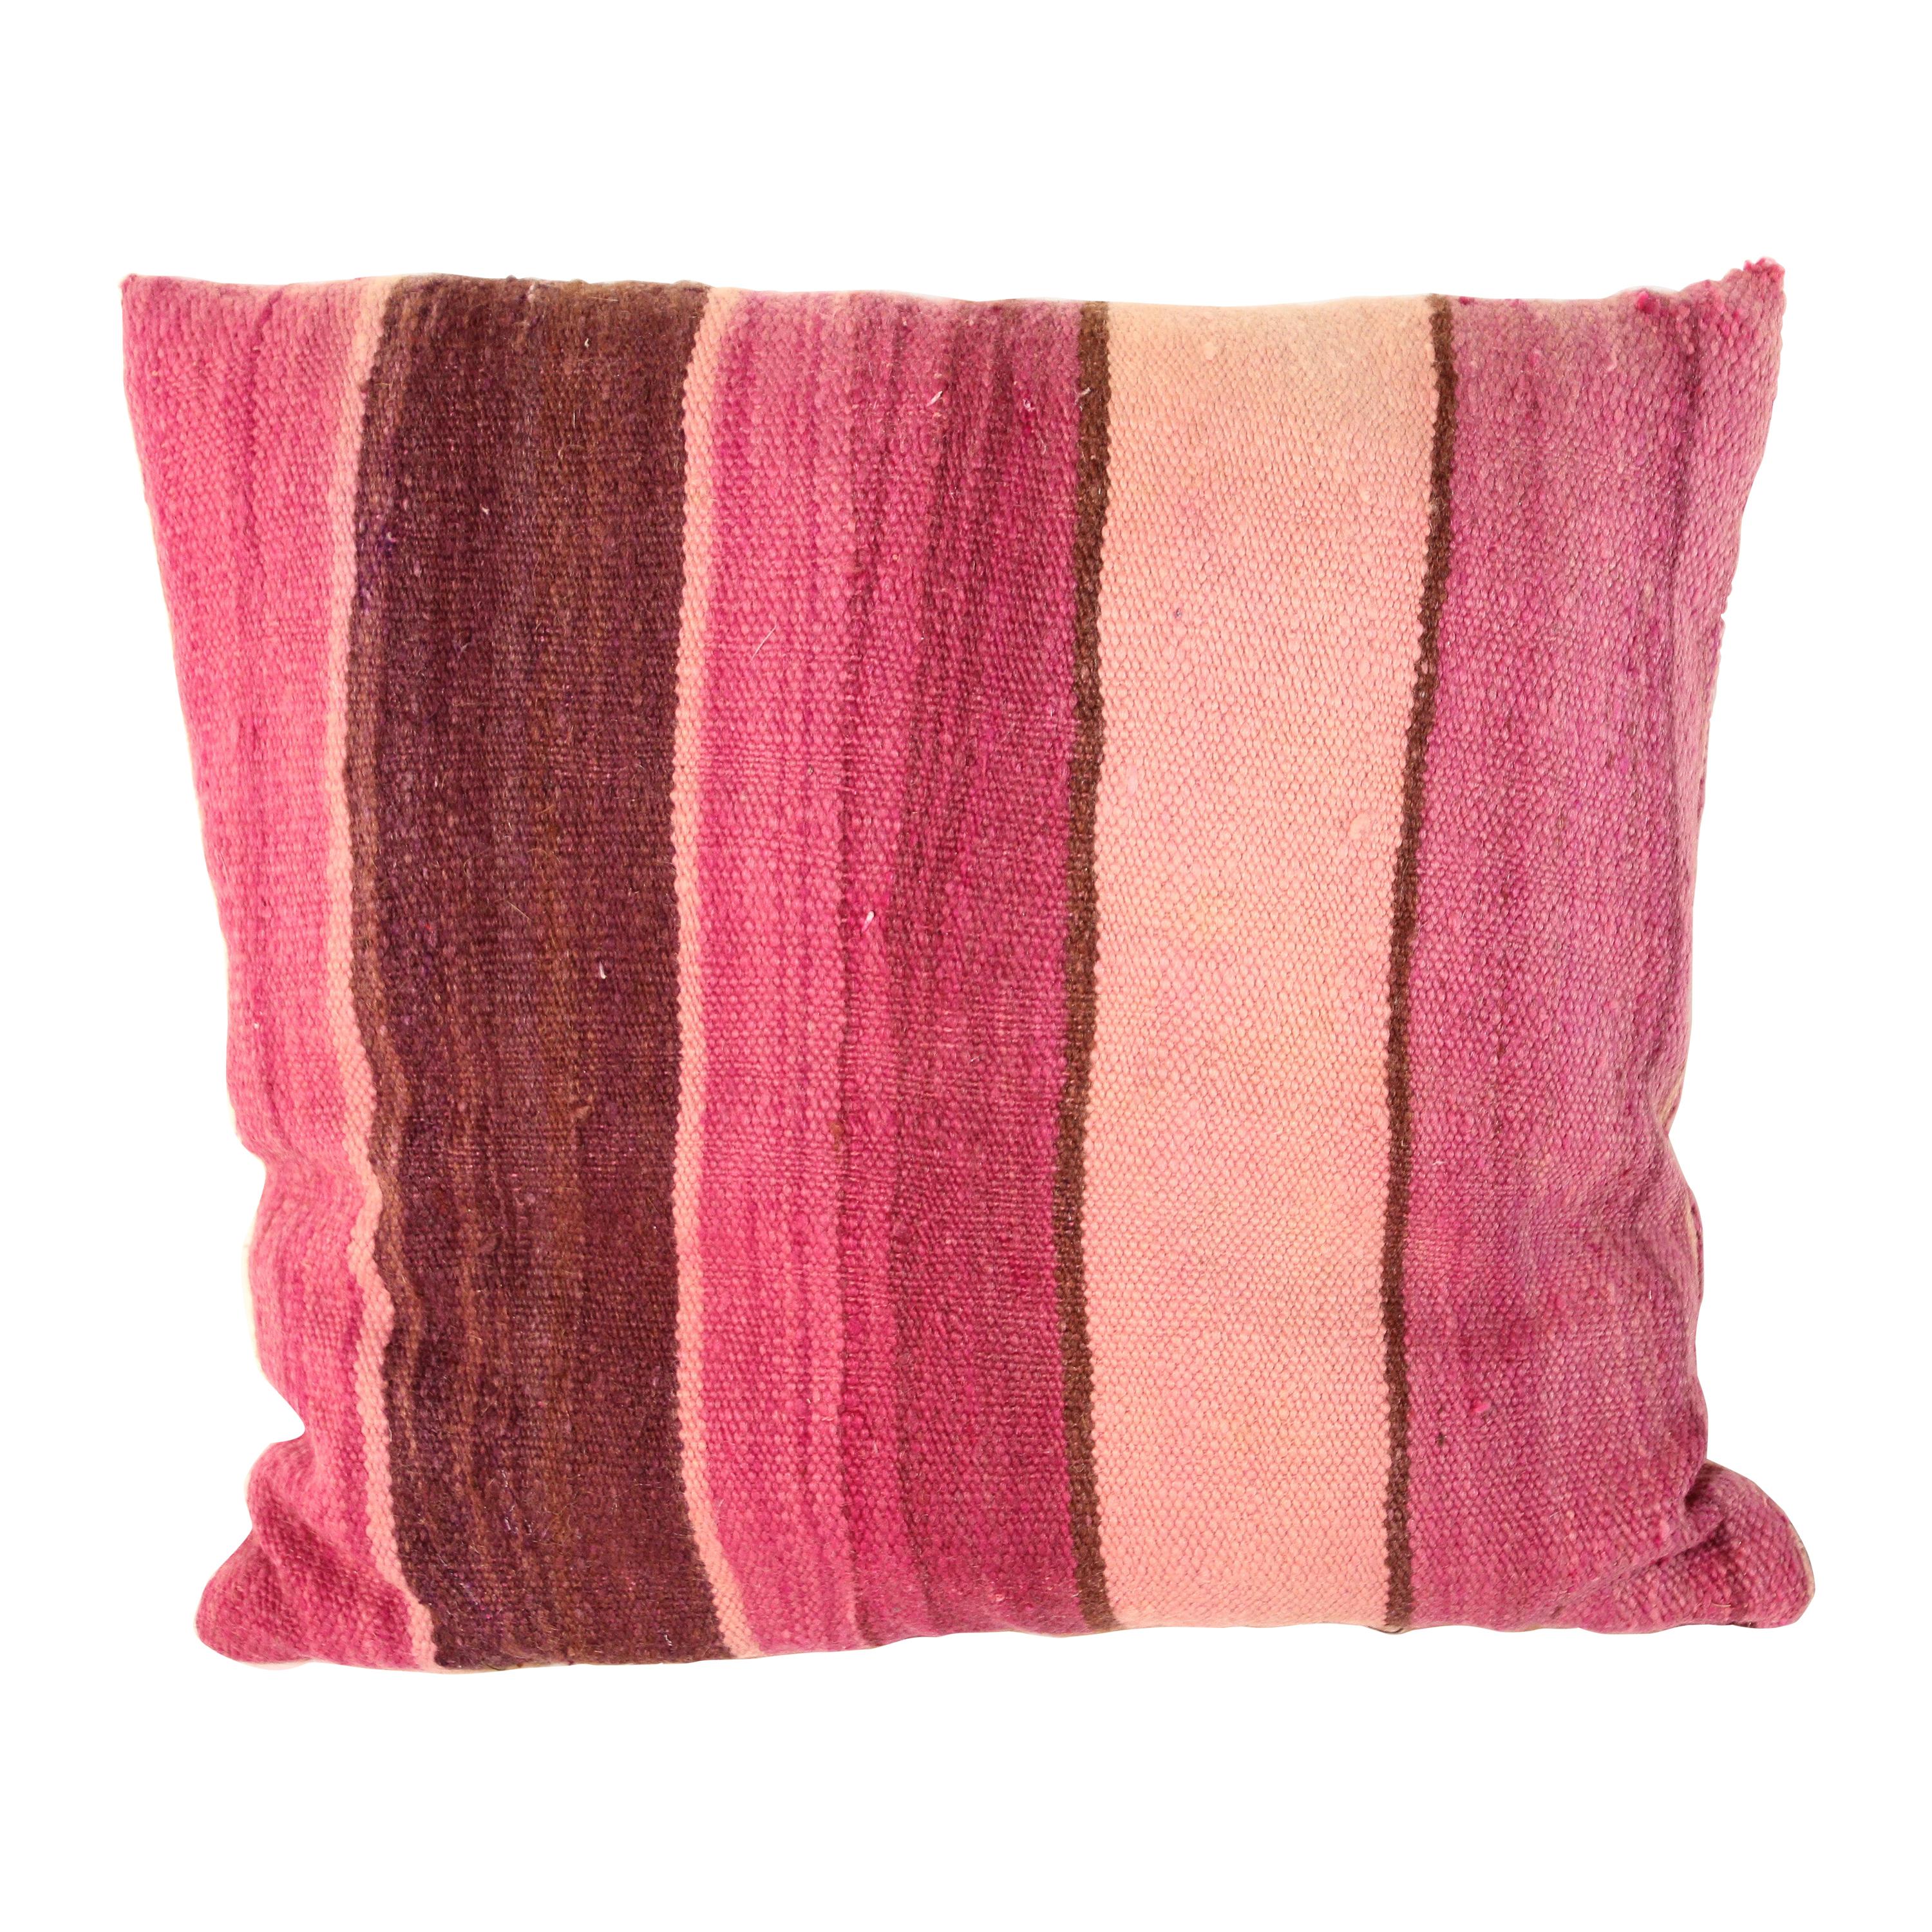 Moroccan Lumbar Pillow Cut from a Vintage Tribal Stripes Rug